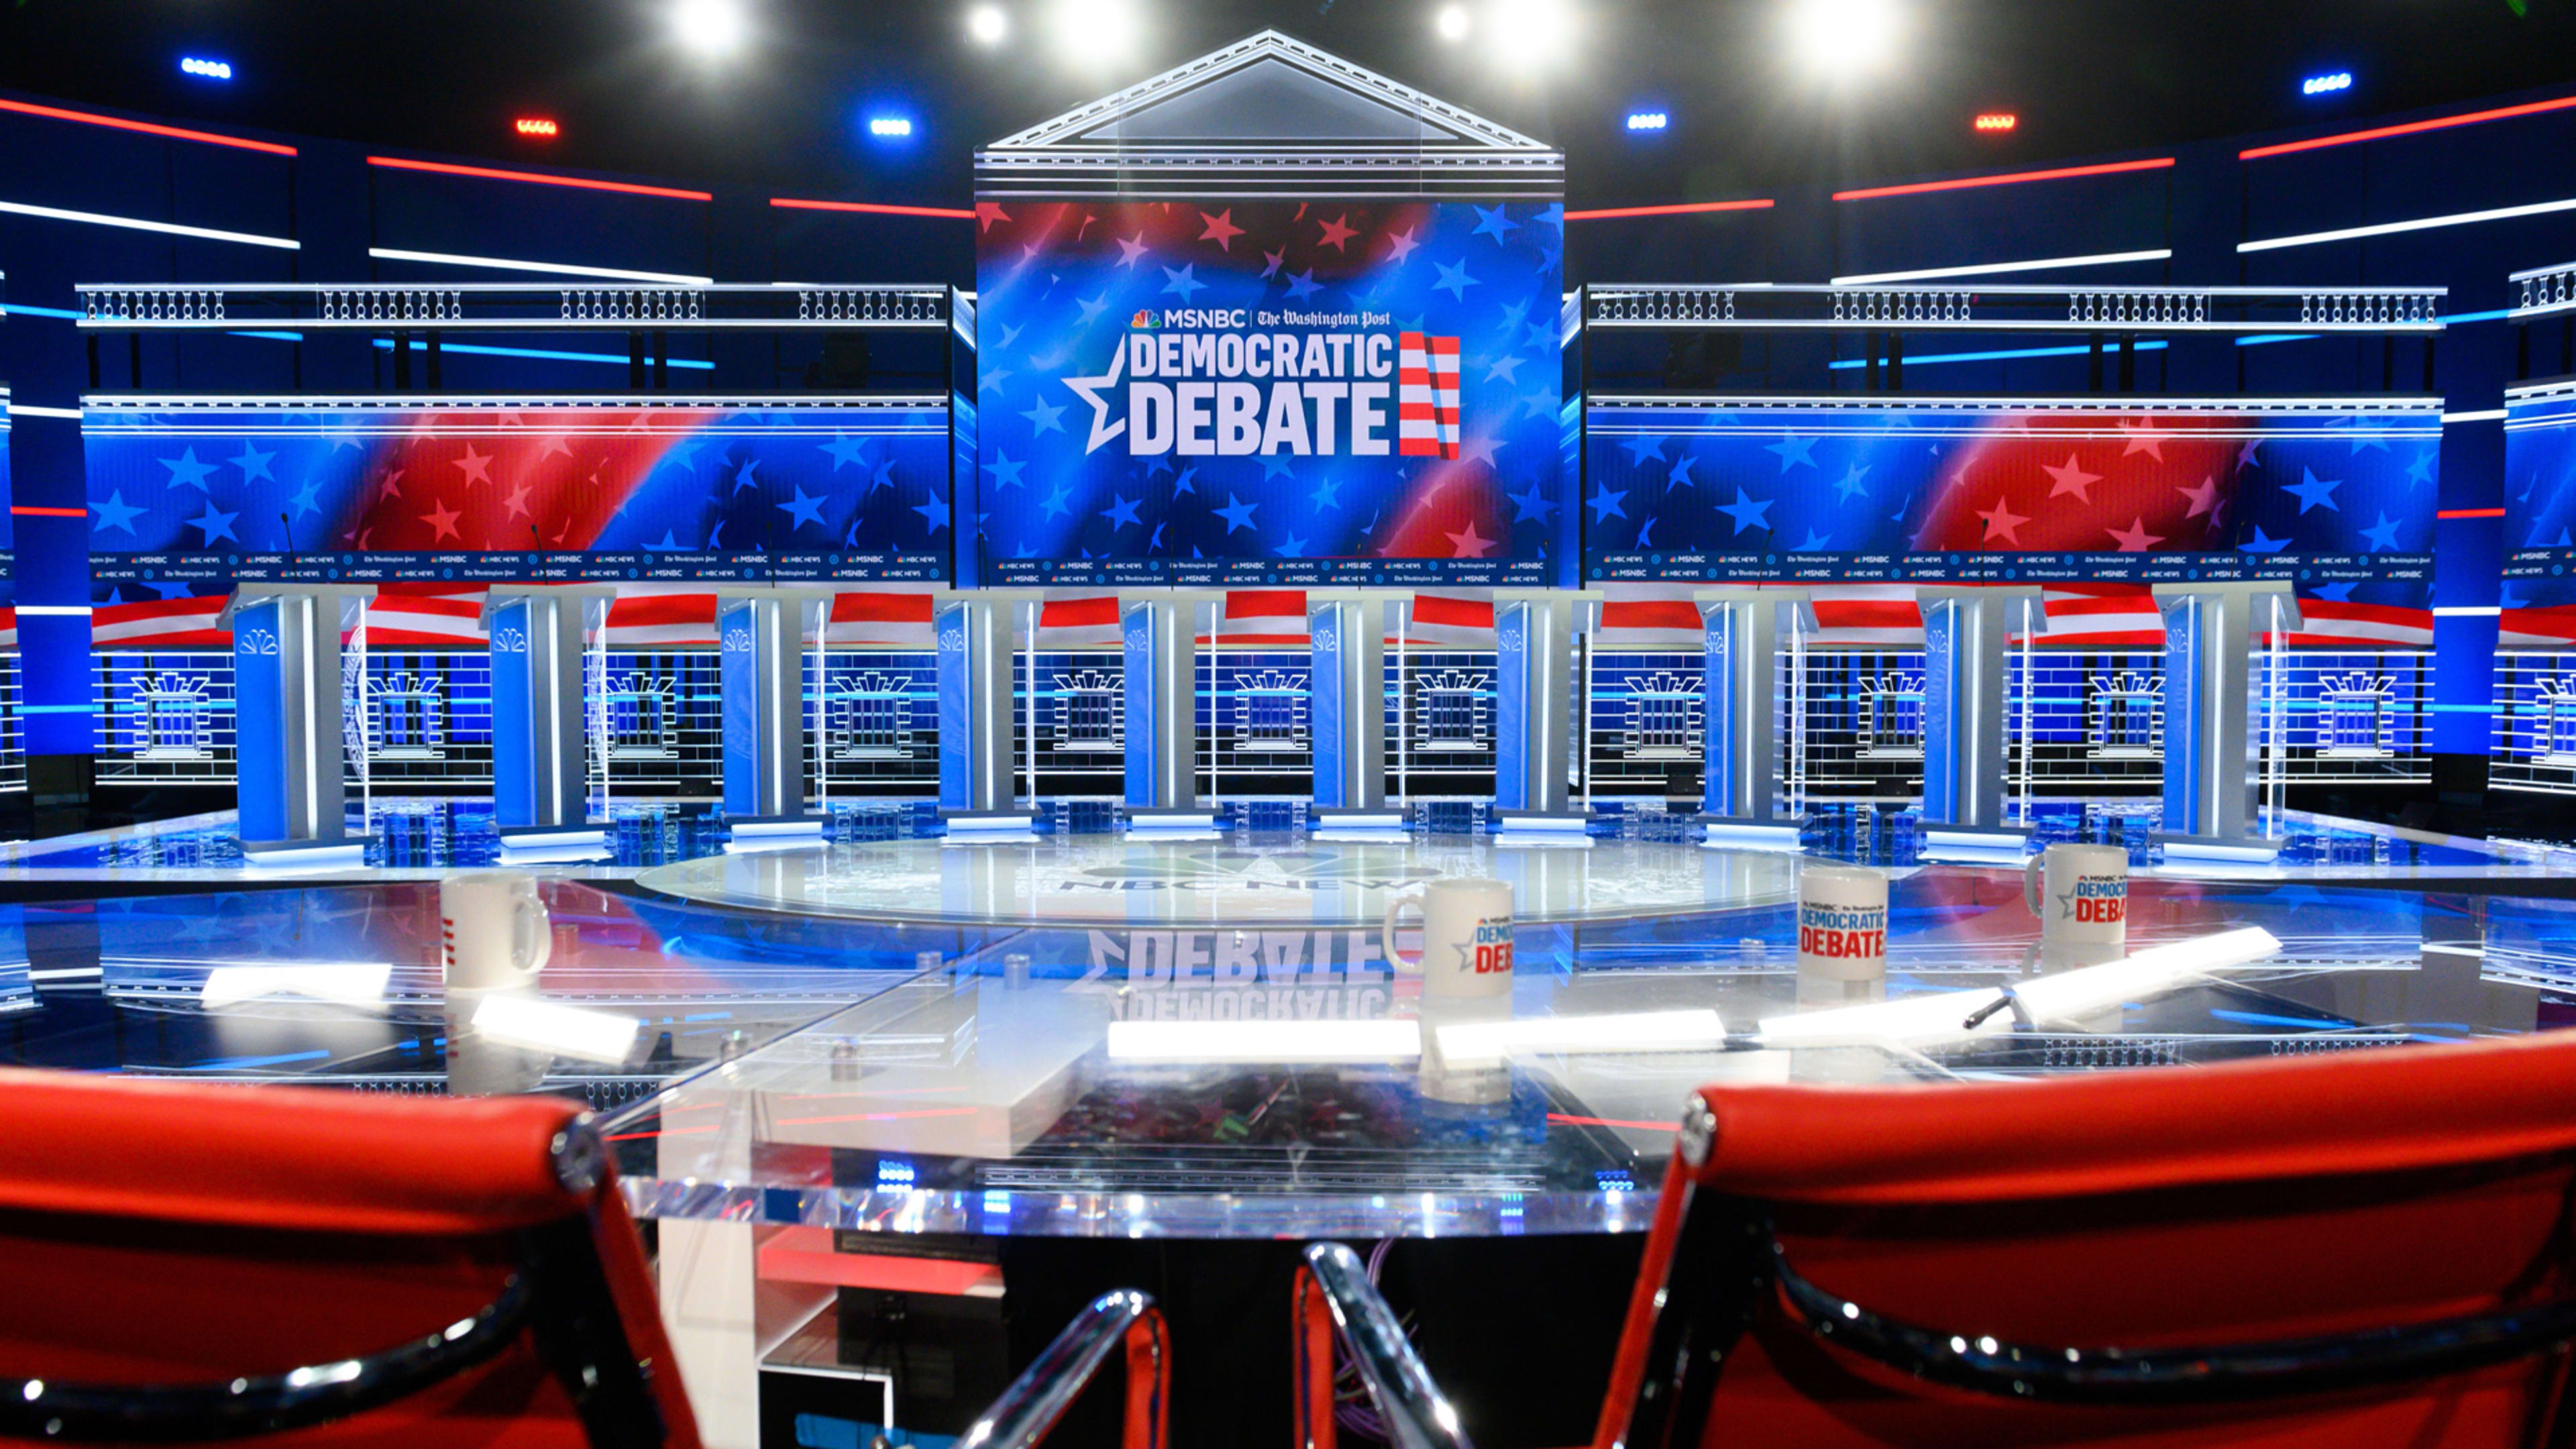 How to watch the Democratic debate on MSNBC live for free without cable